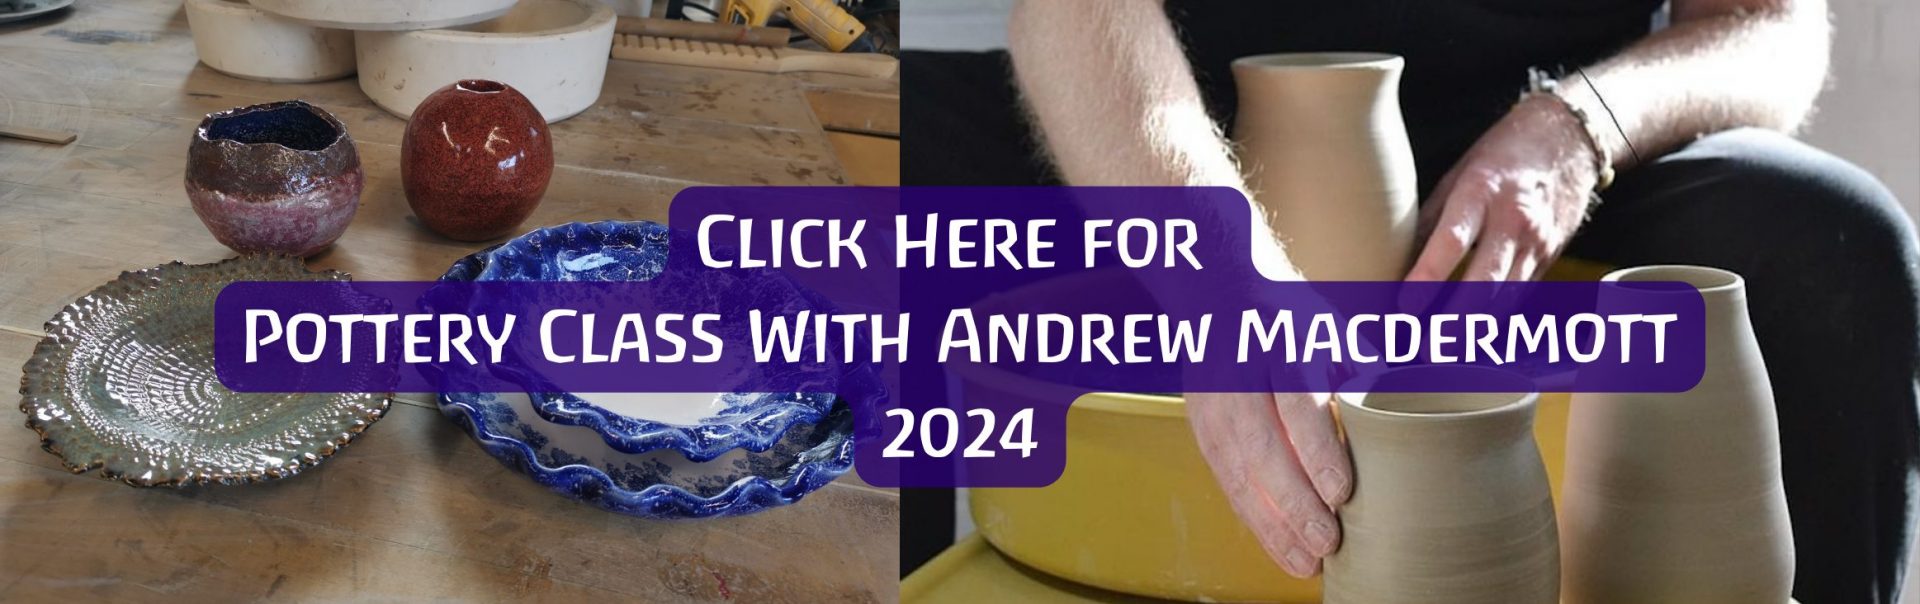 Pottery Class With Andrew Macdermott 2024